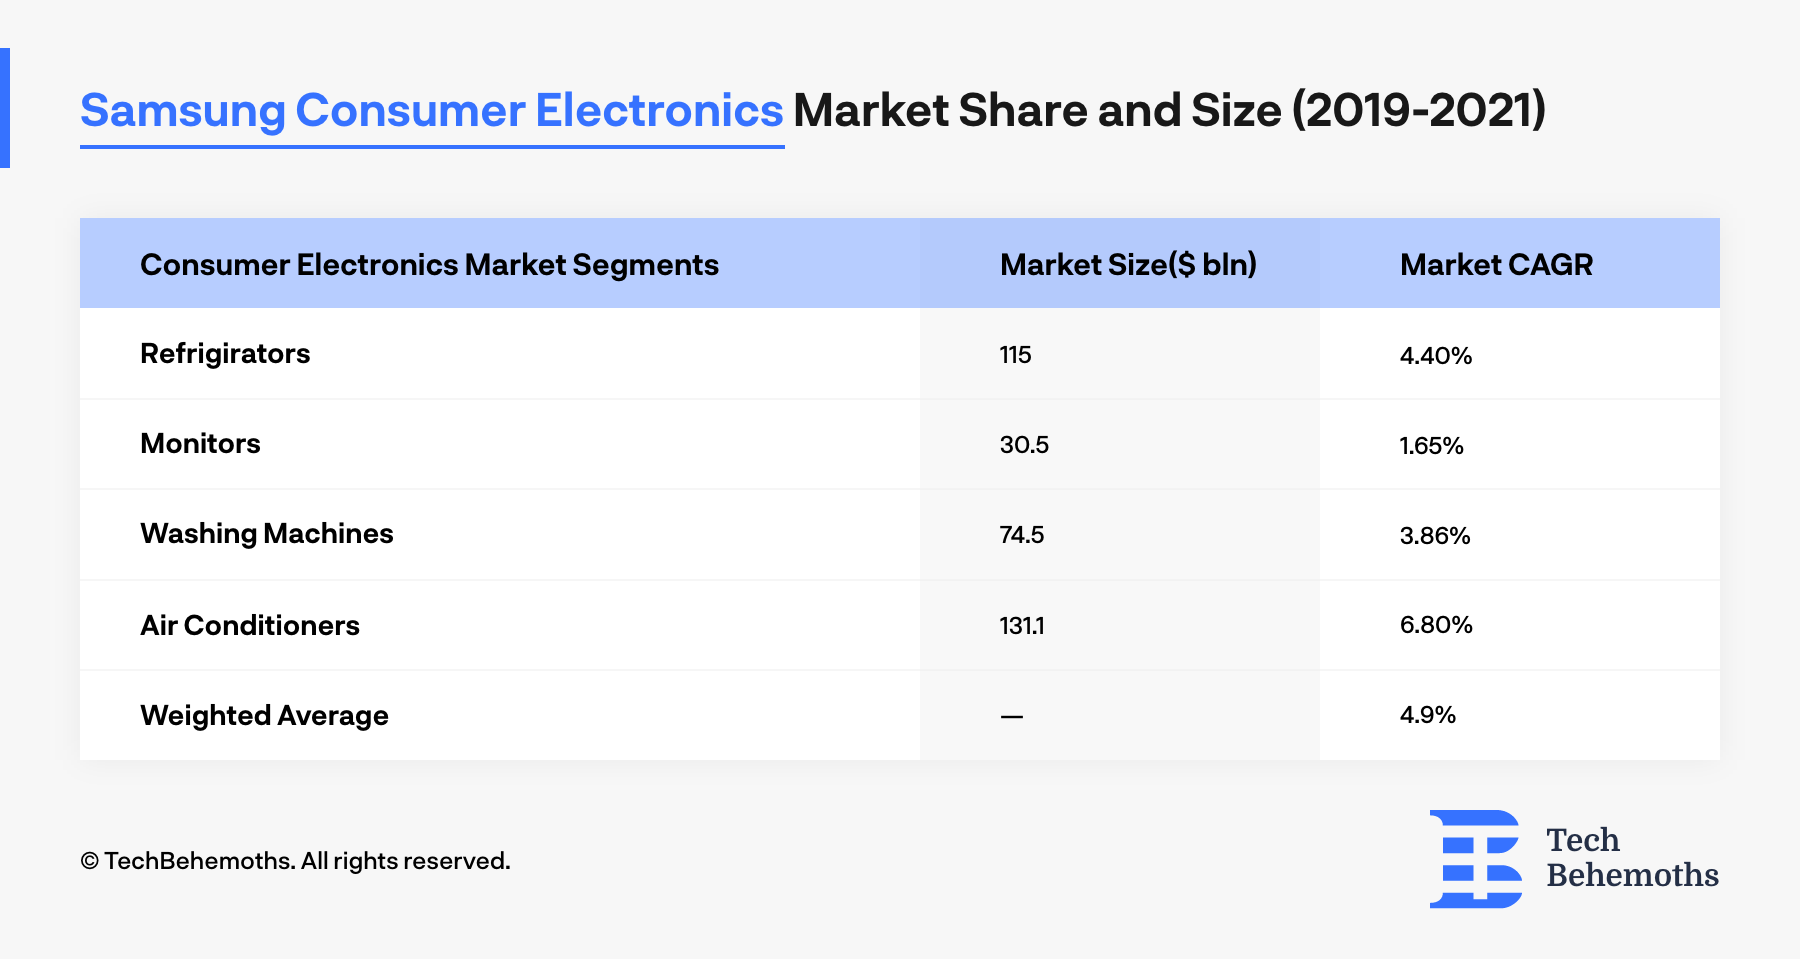 Samsung Sales by Category: 2018-2021